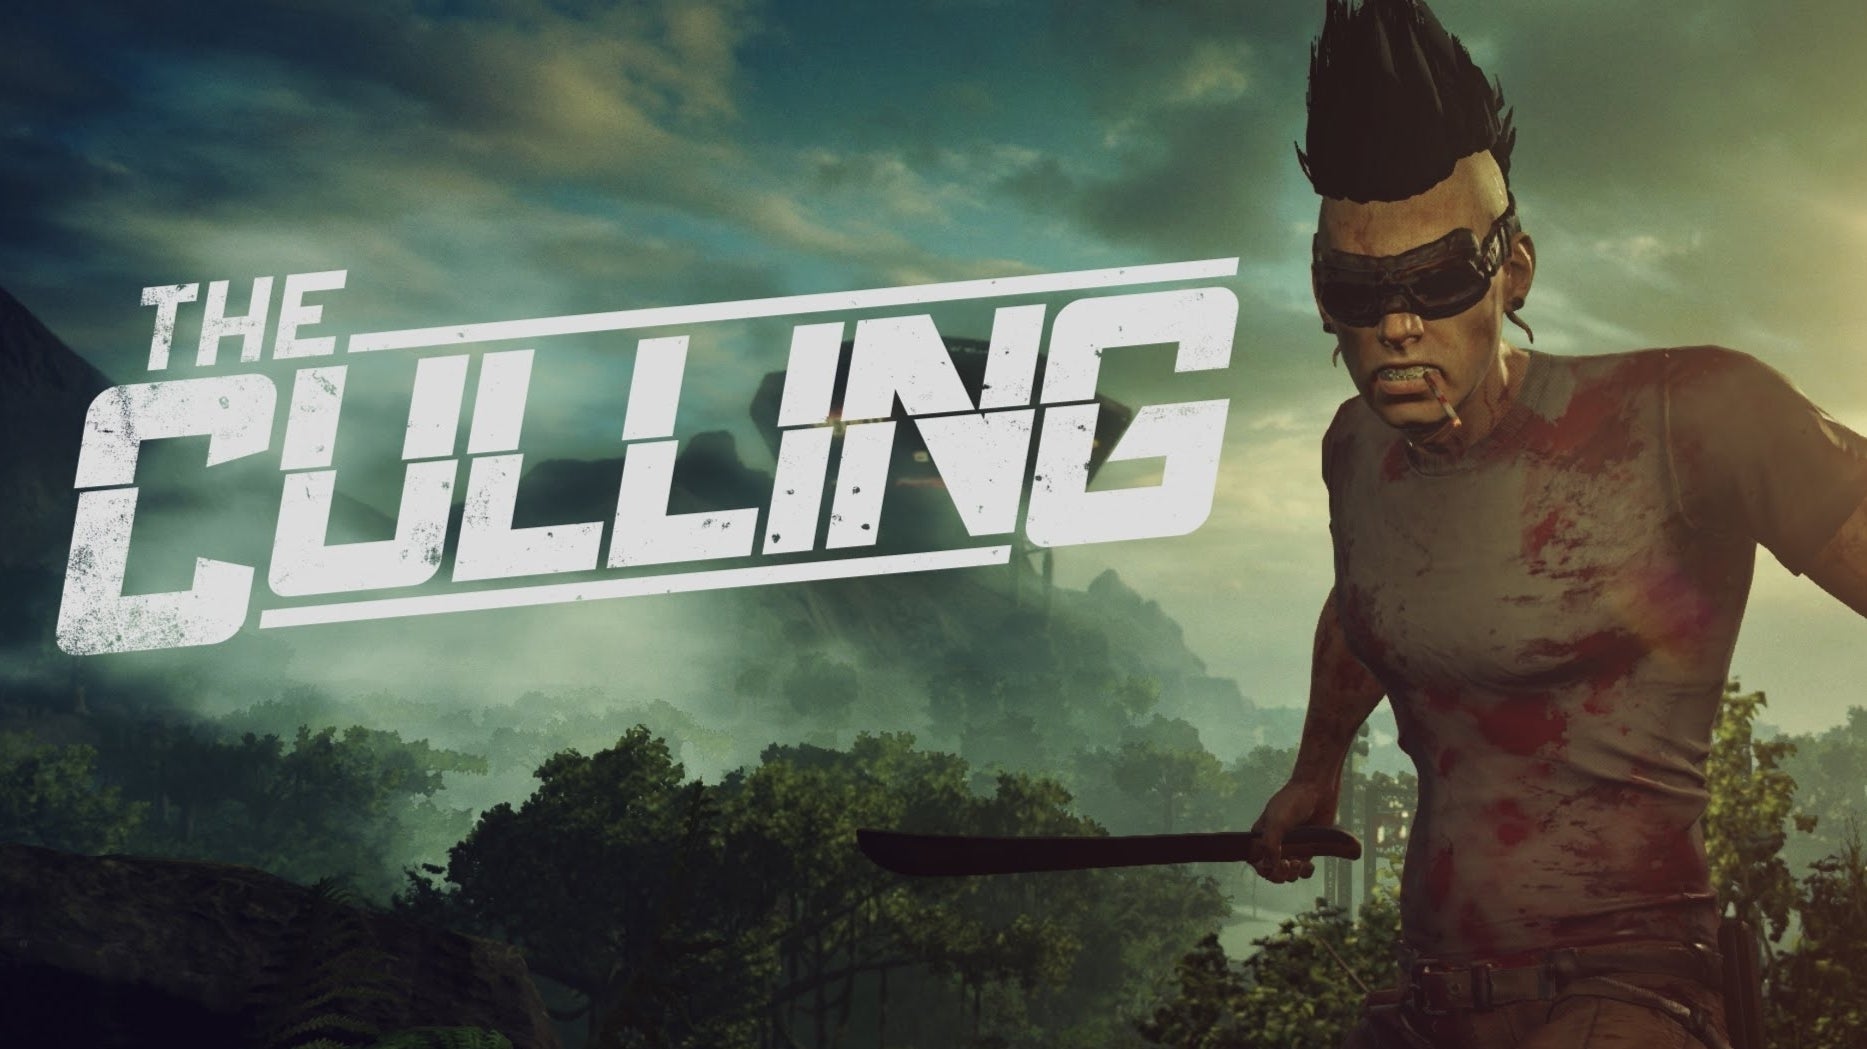 Image for The Culling appears to finally be dead